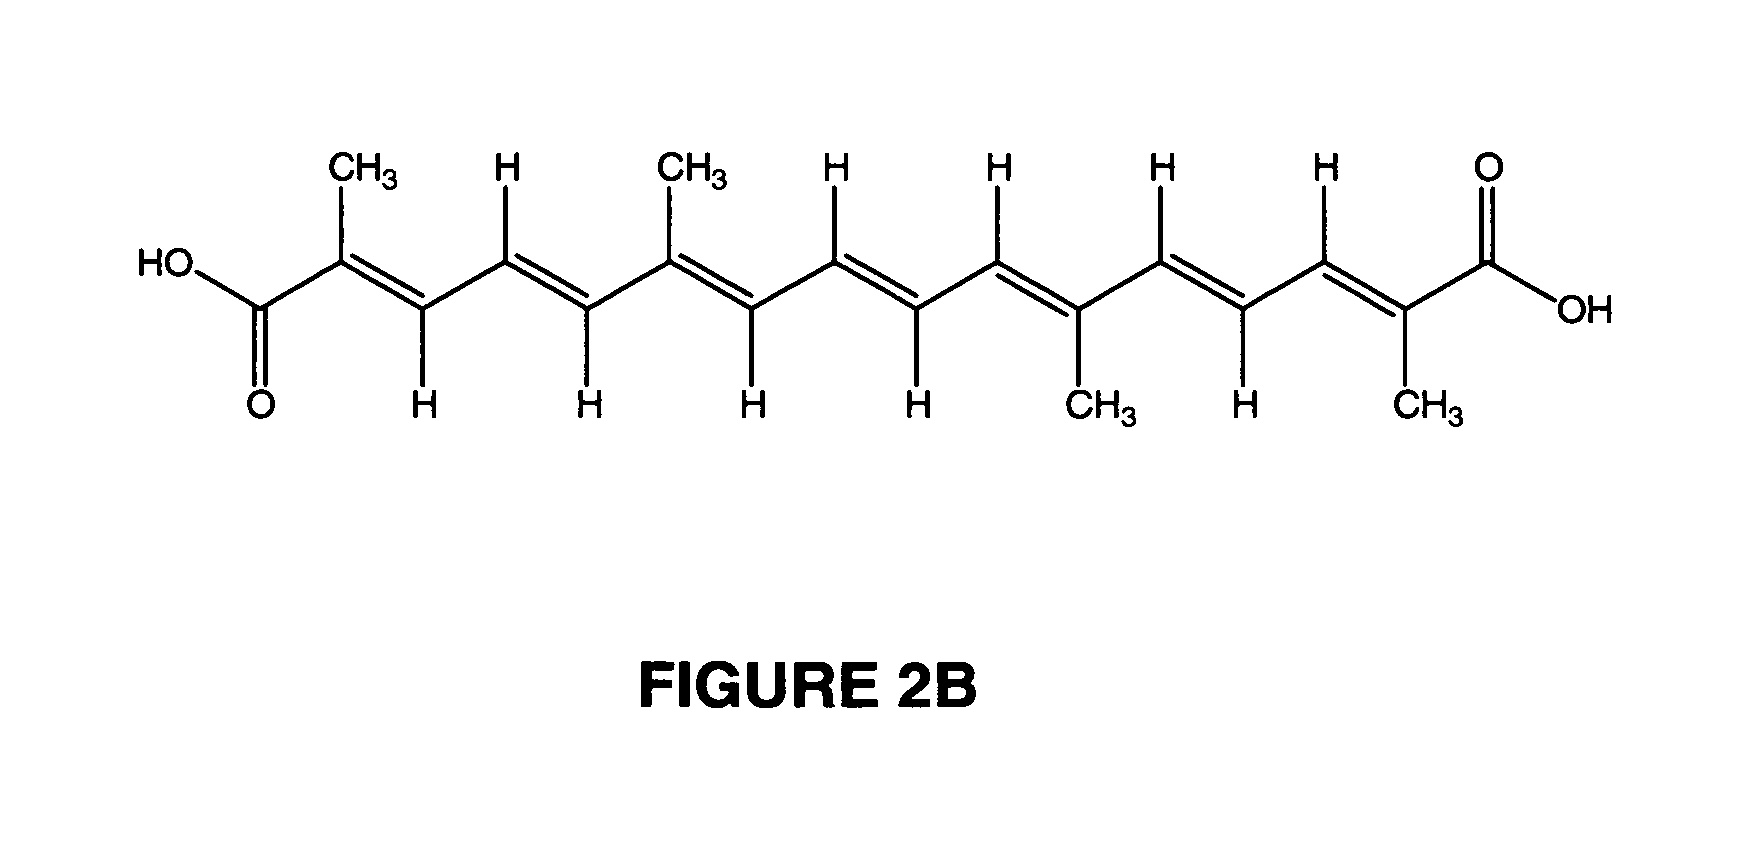 Purified Crocetin Compound And Method For Treating, Inhibiting, And/Or Prophylaxis of Cancer, Such As Pancreatic Cancer